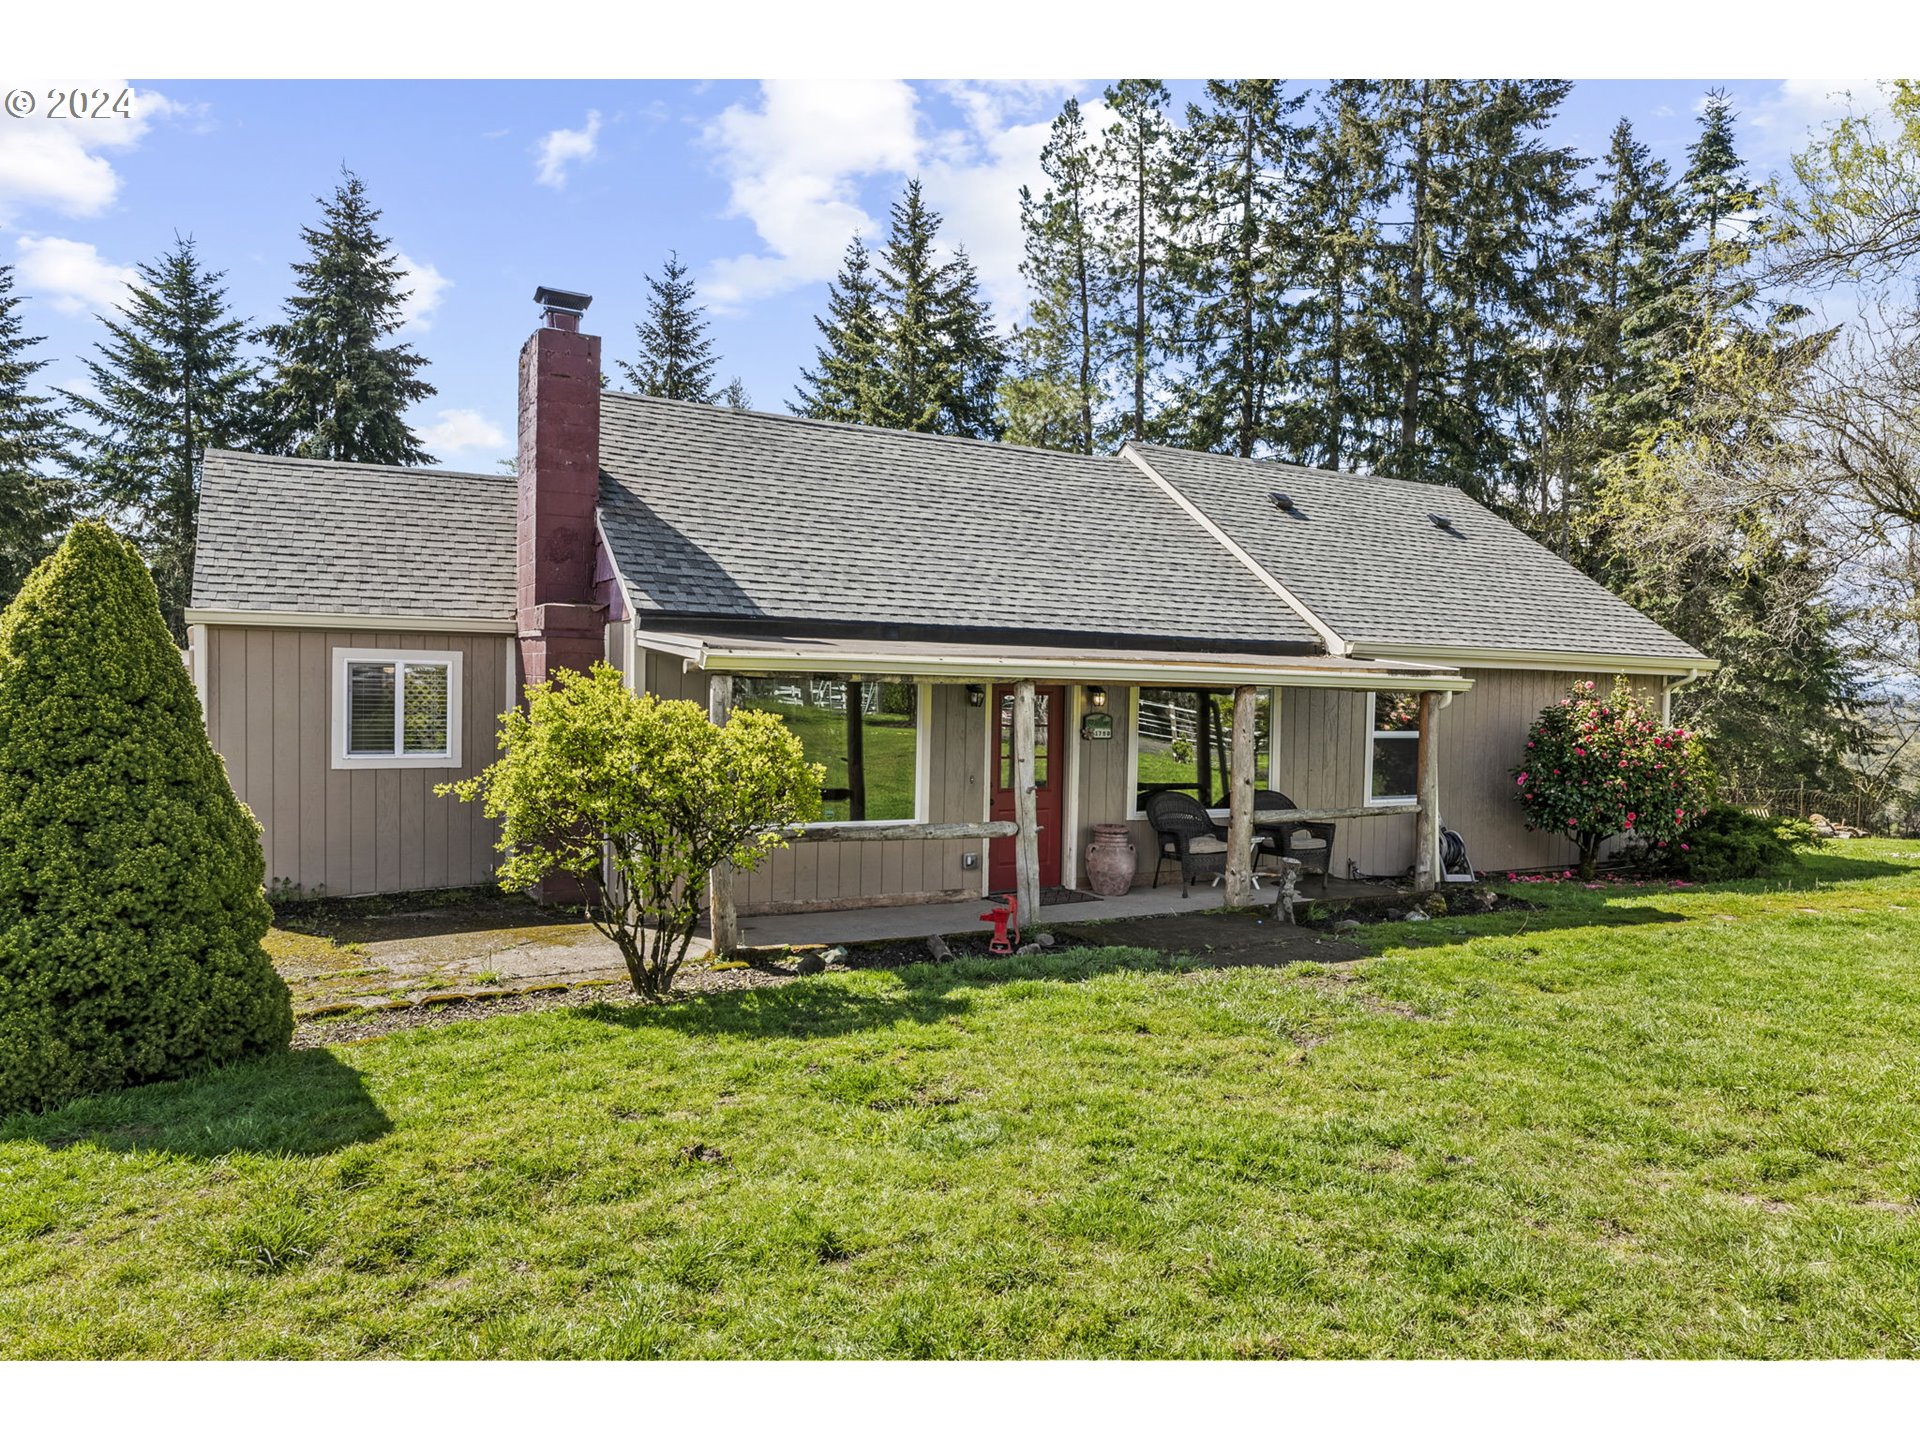 1750 HOLCOMB RD, Kelso, WA 98626